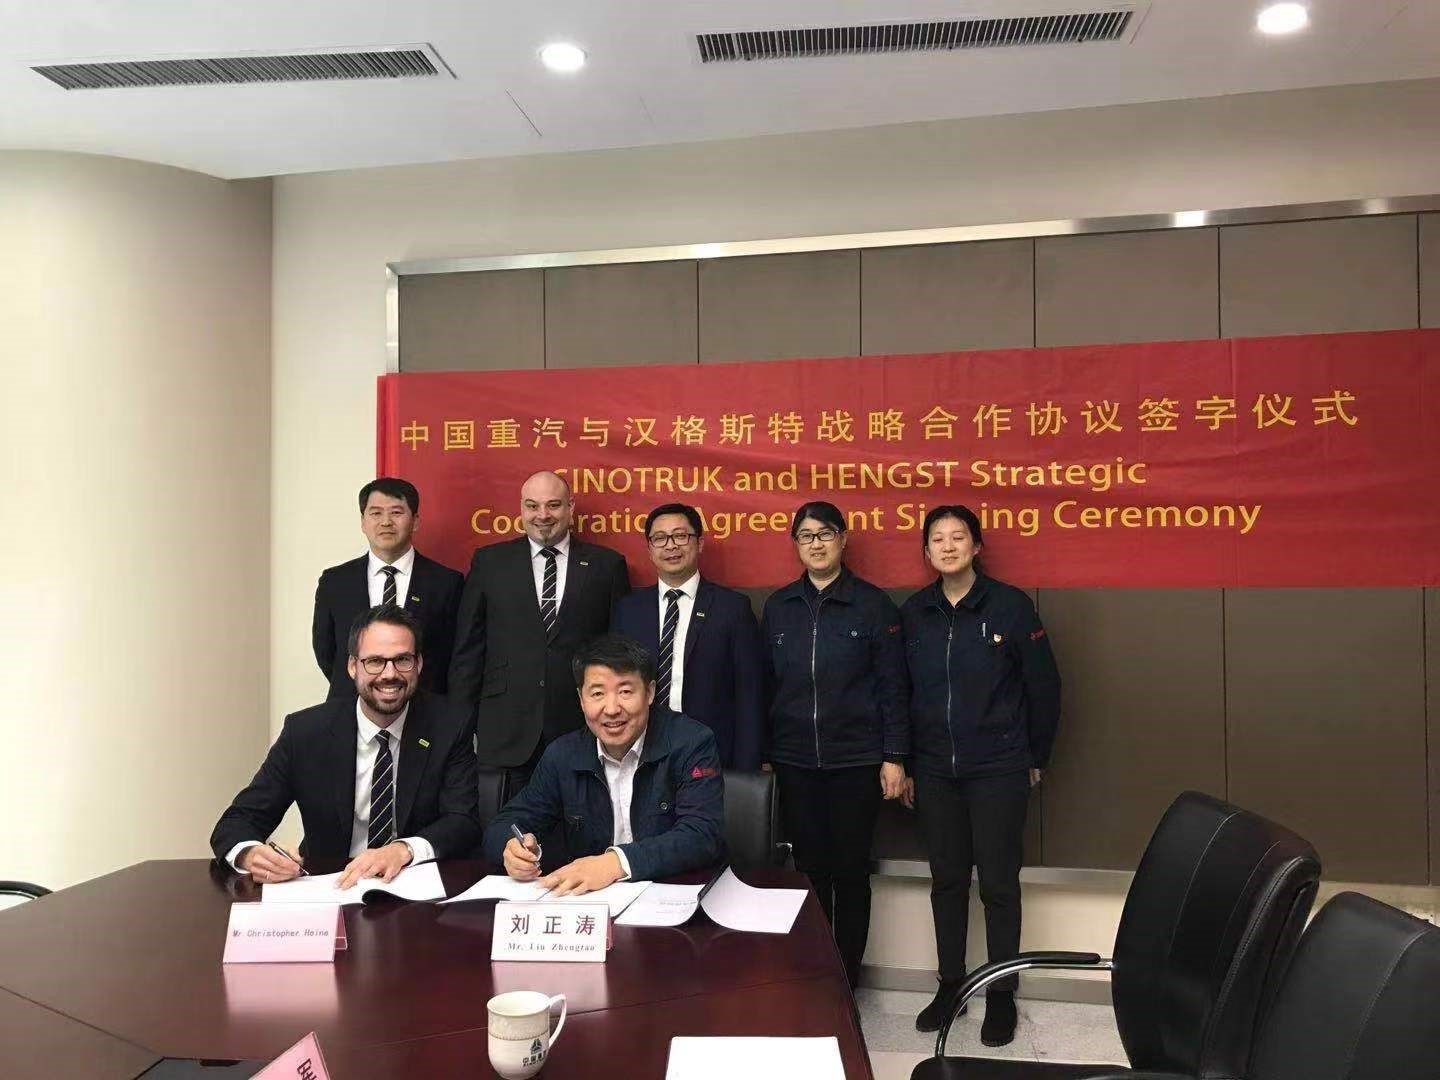 Signing of the strategic alliance agreement with Sinotruk.  Front row from left: Christopher Heine, CEO of Hengst SE and Liu Zheng Tao, vice general manager of Sinotruk.